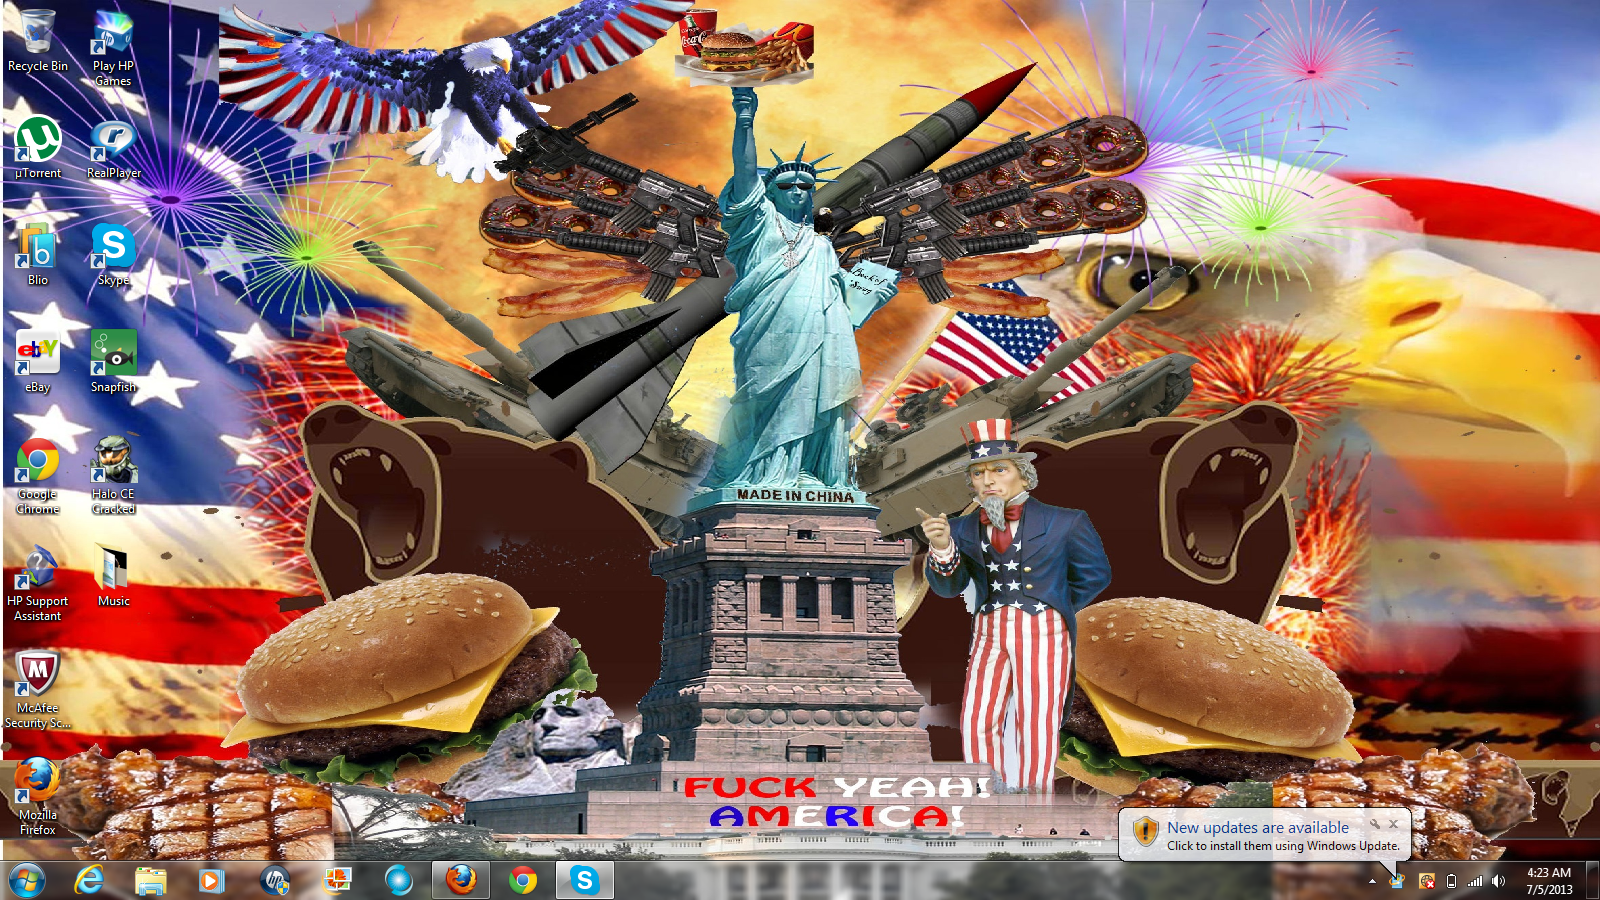 Thanks For My New Background It's Glorious **** Yea - Statue Of Liberty , HD Wallpaper & Backgrounds